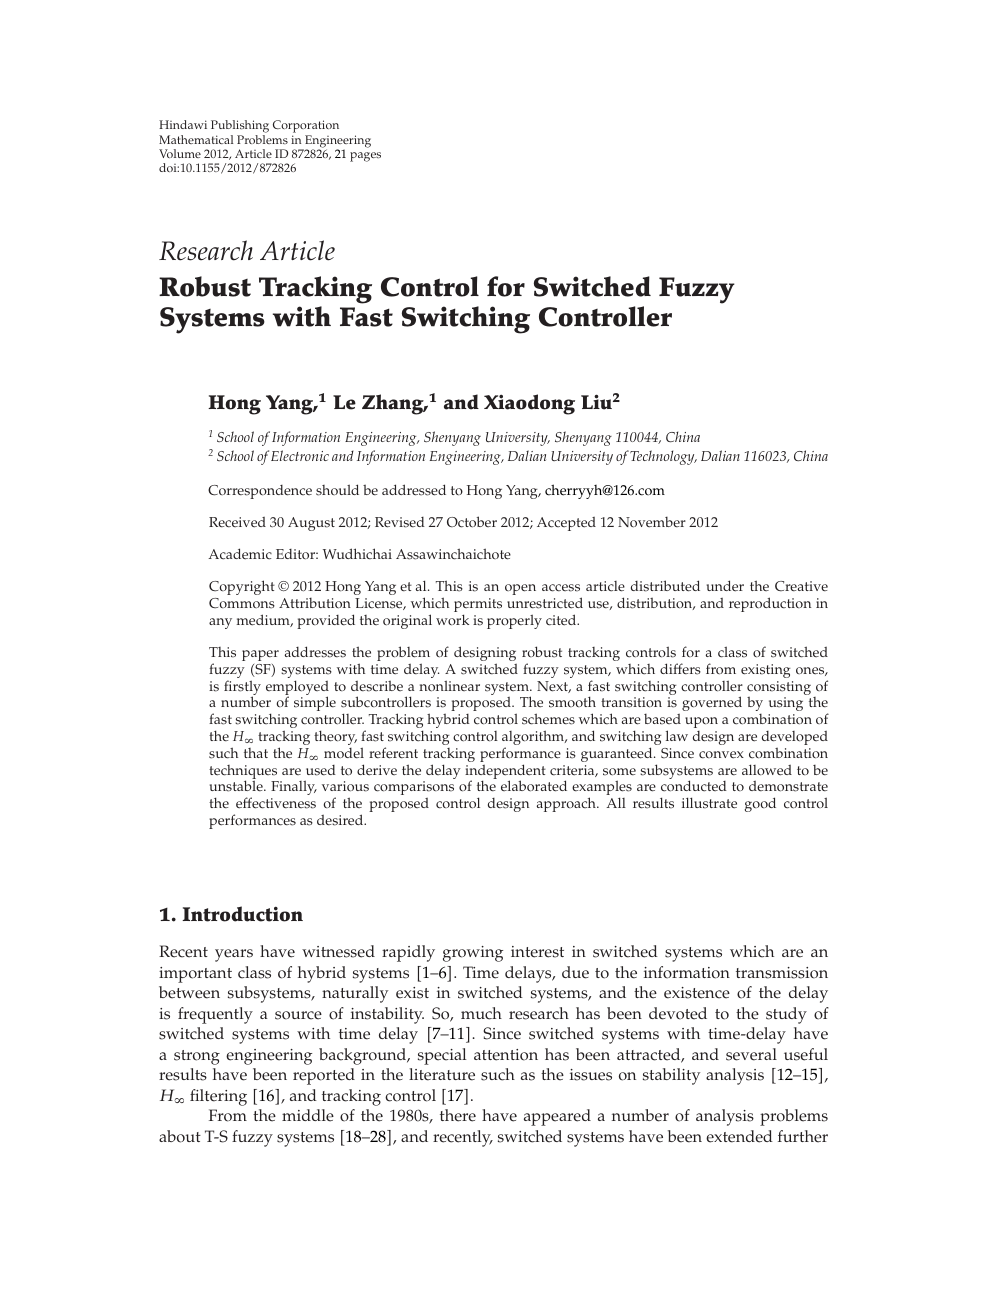 Robust Tracking Control For Switched Fuzzy Systems With Fast Switching Controller Topic Of Research Paper In Mathematics Download Scholarly Article Pdf And Read For Free On Cyberleninka Open Science Hub